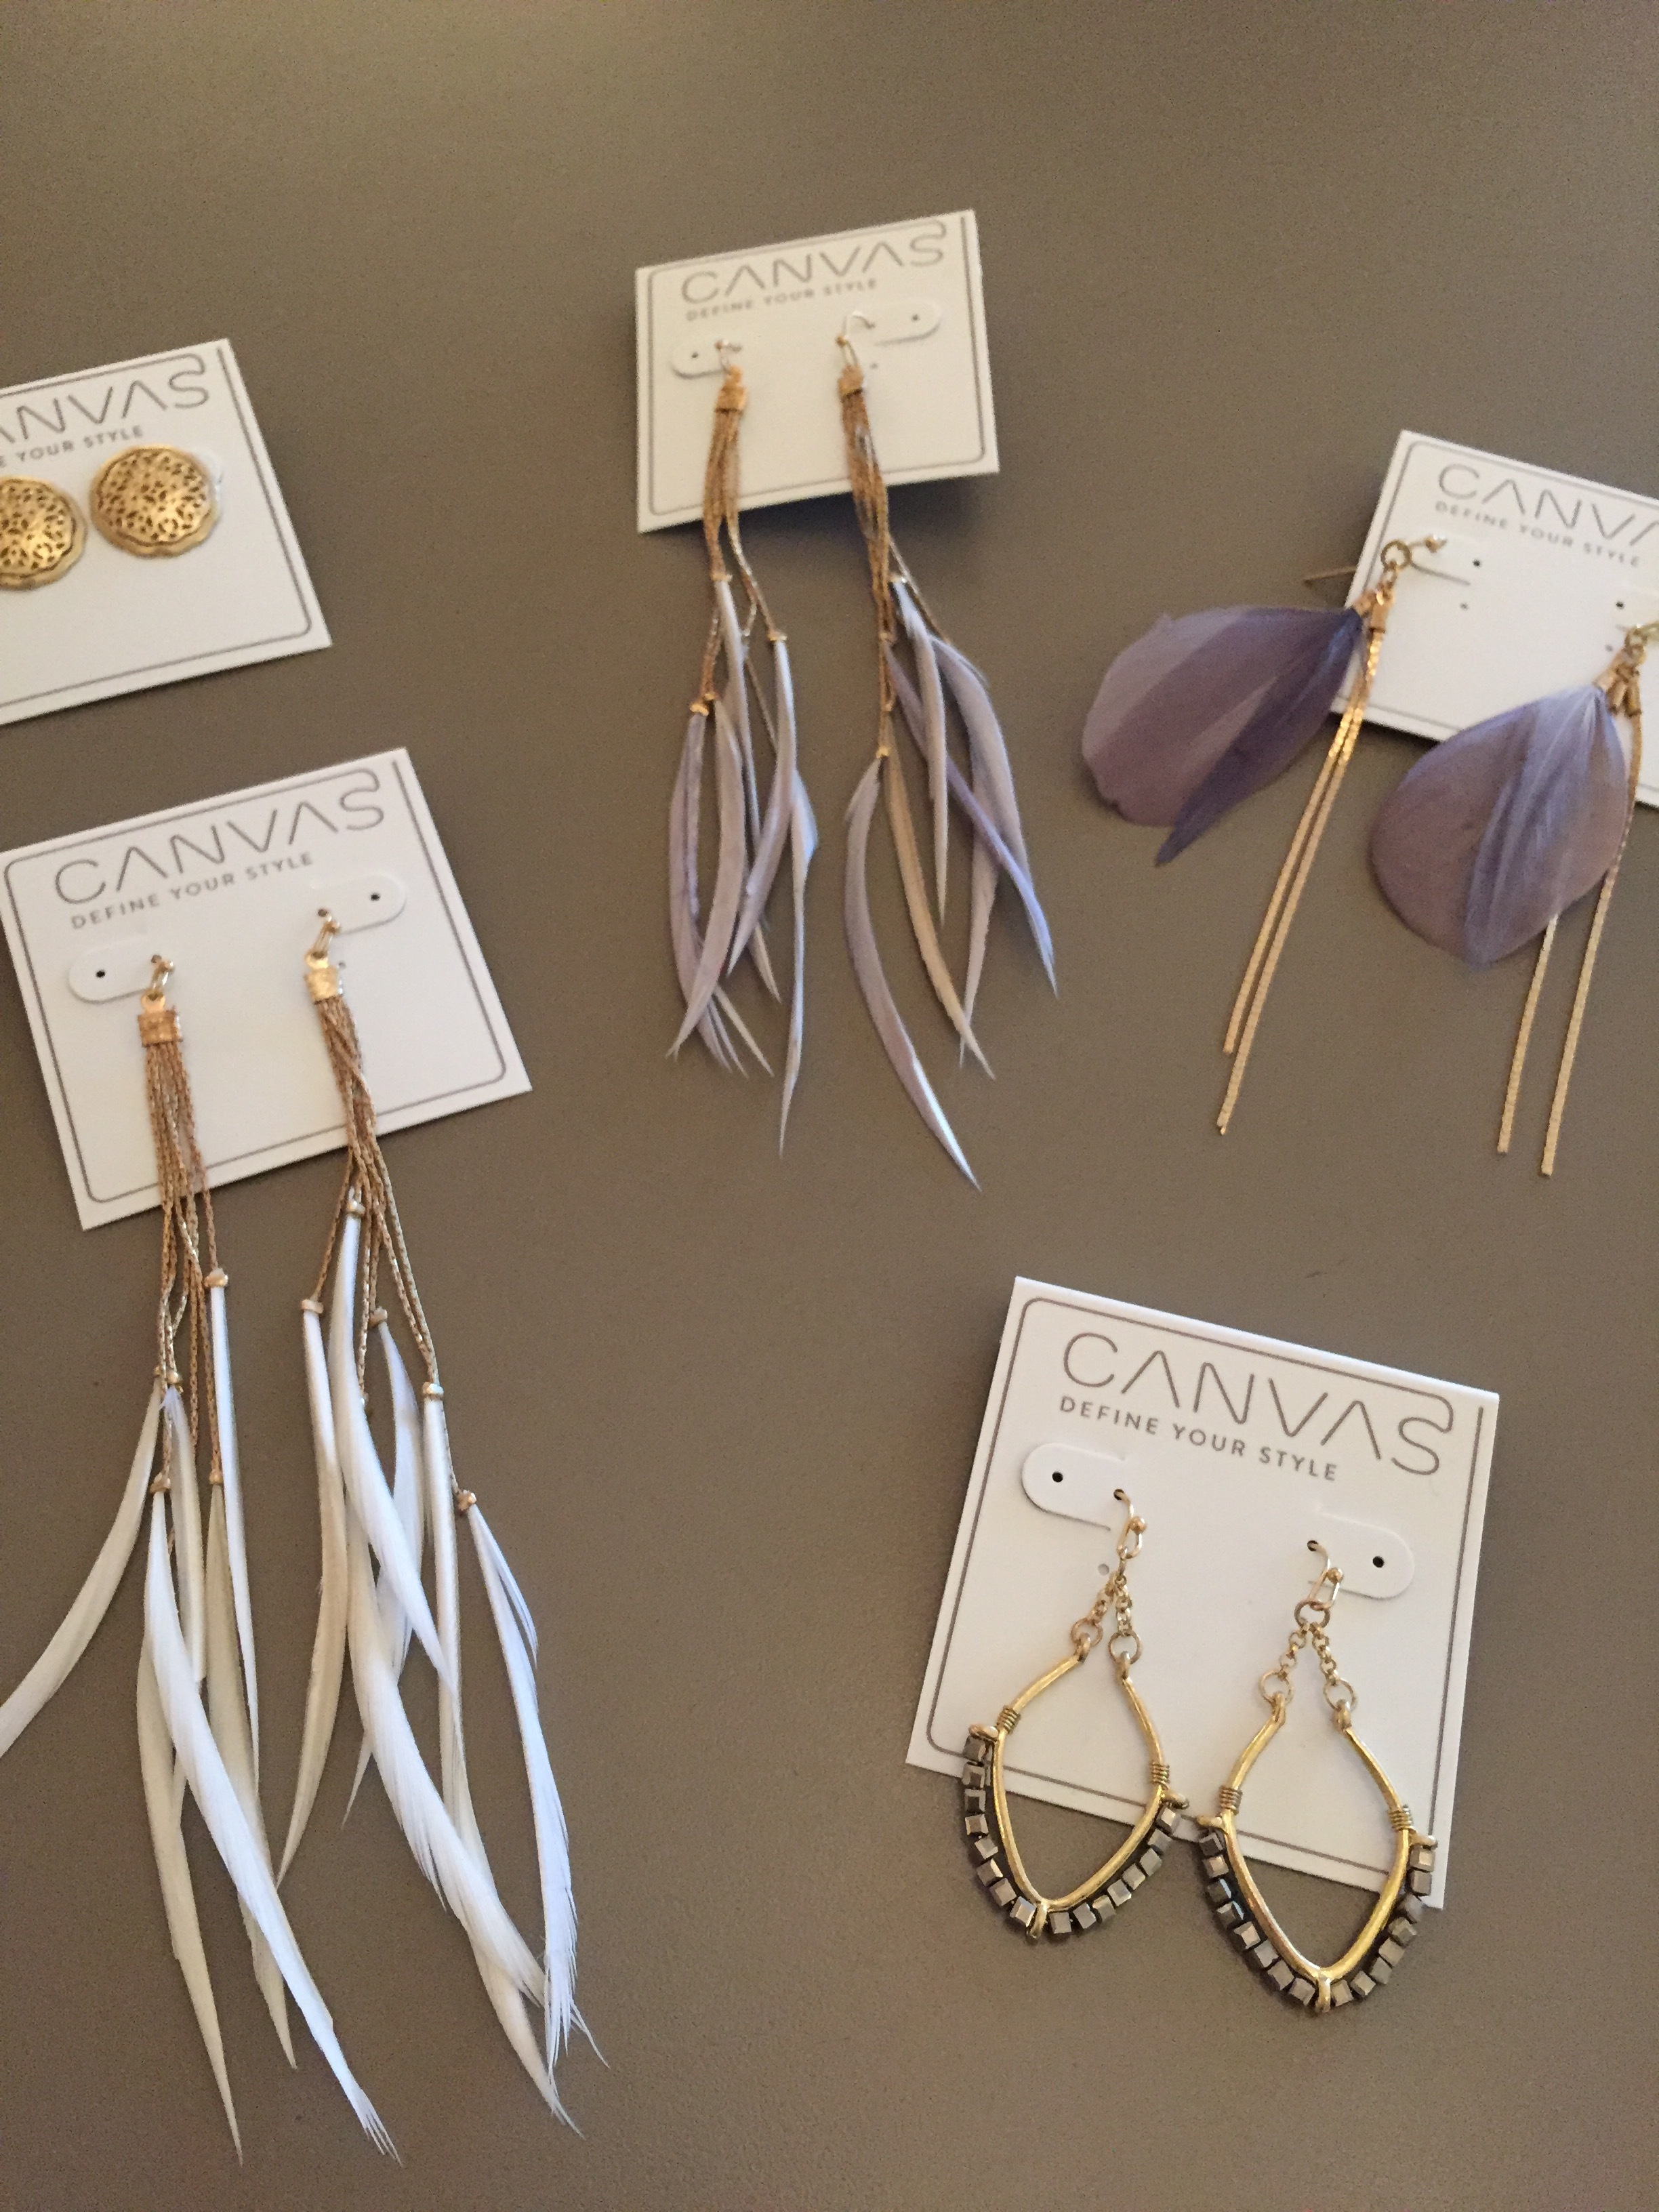 Canvas jewelry in stock (earrings and necklaces at various prices)